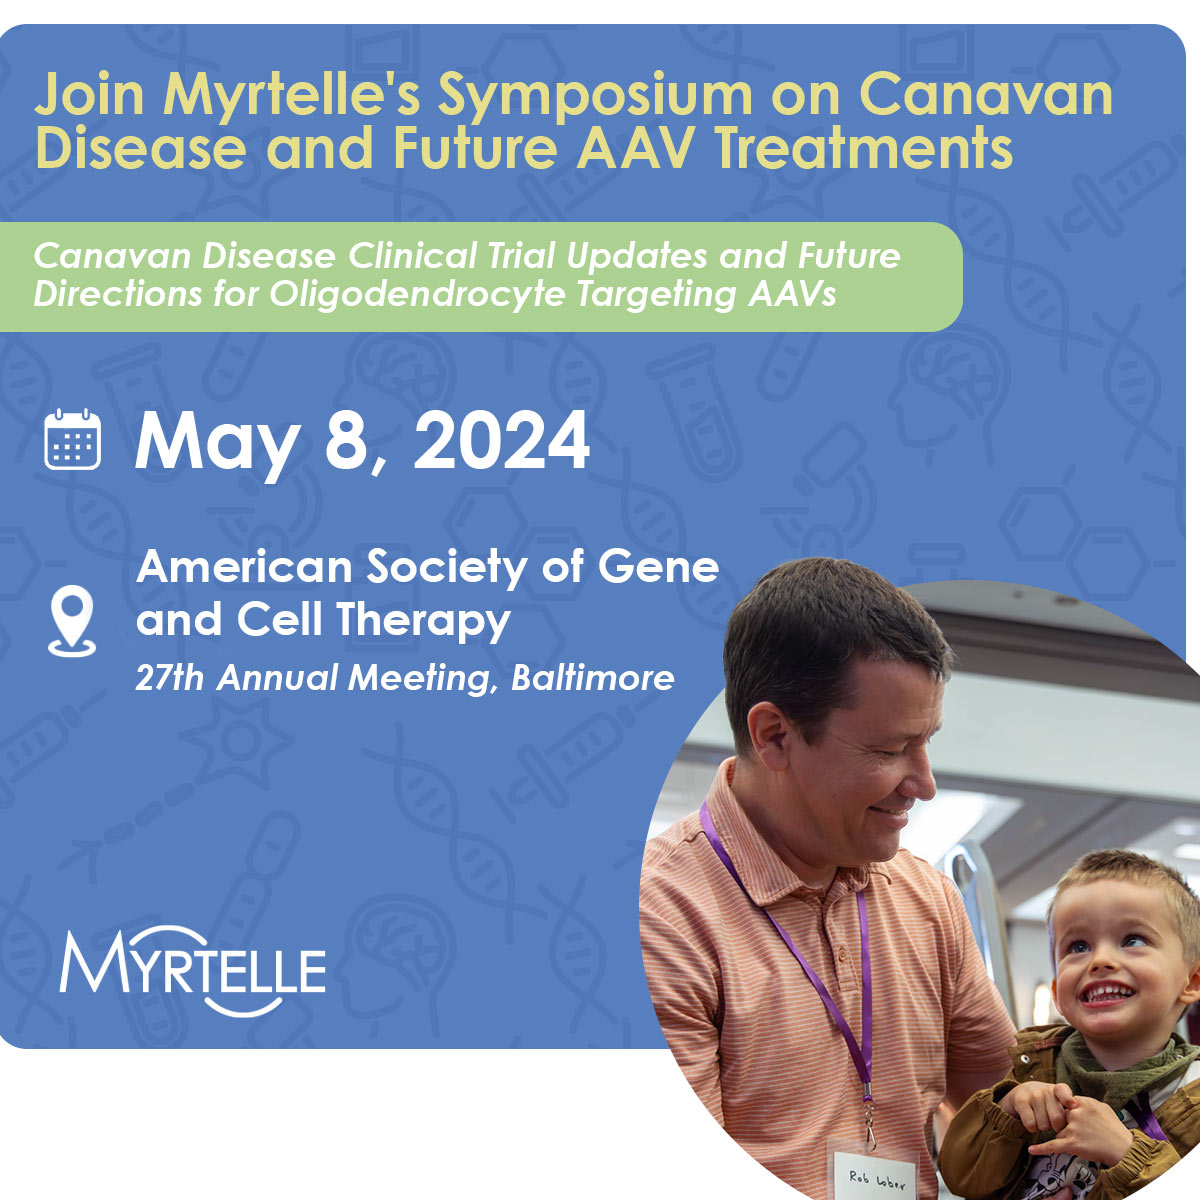 Join Myrtelle's symposium on Canavan disease and future AAV treatments on May 8, 2024 at the annual ASGCT meeting in Baltimore. #asgct #genetherapy #canavandisease #Myrtelle
myrtellegtx.com/symposium-cana…